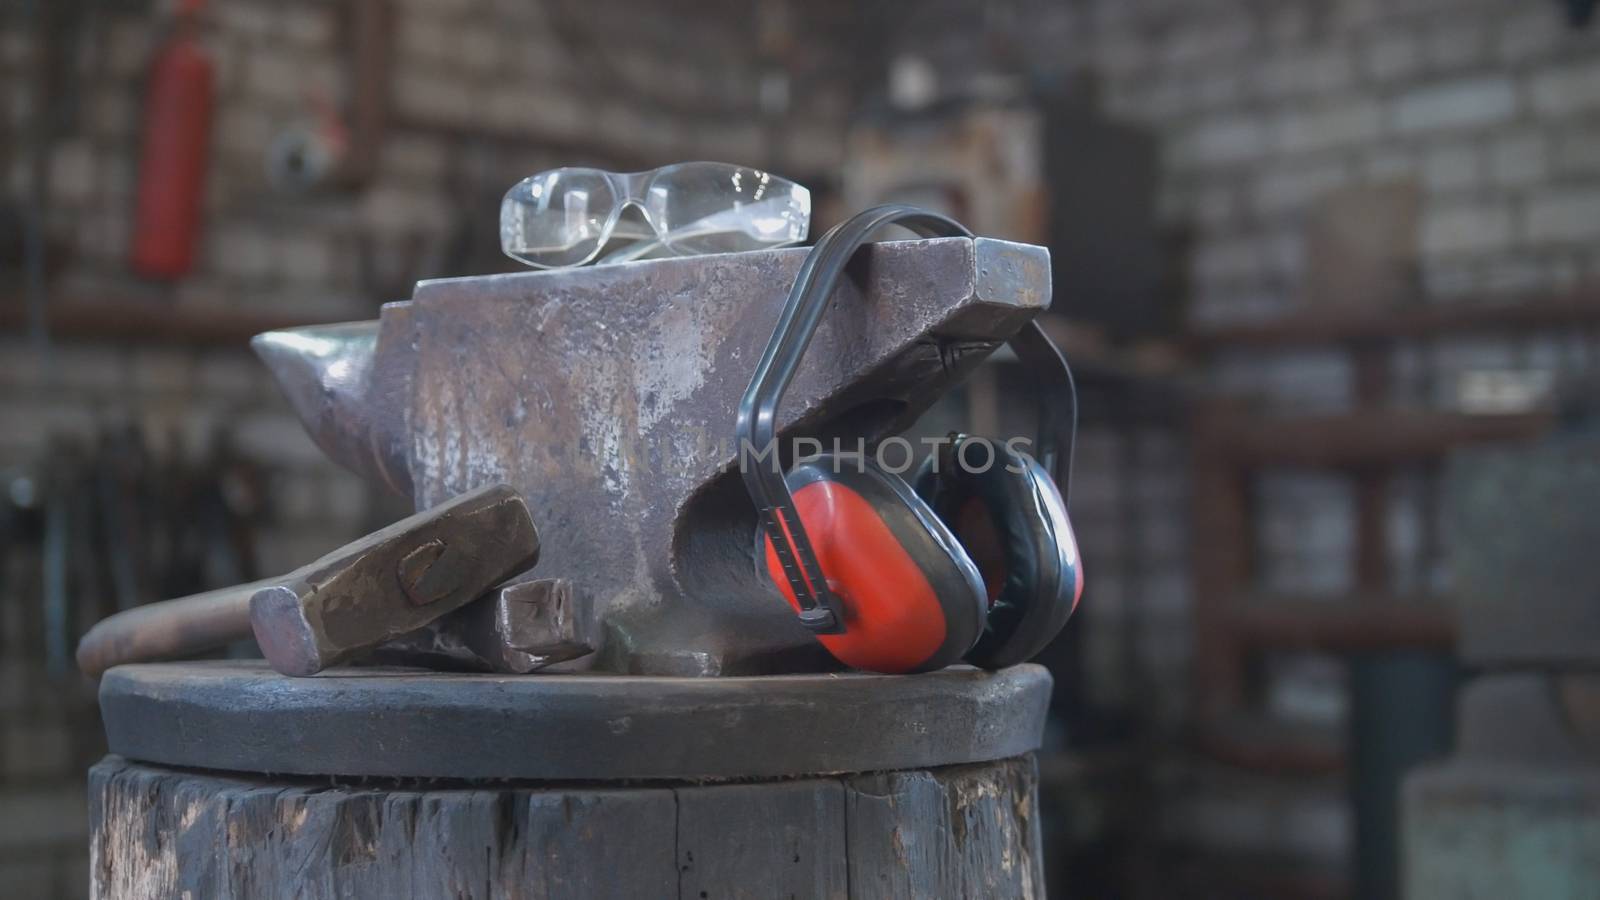 Forge workshop - hammer, anvil and protect headphones, close up